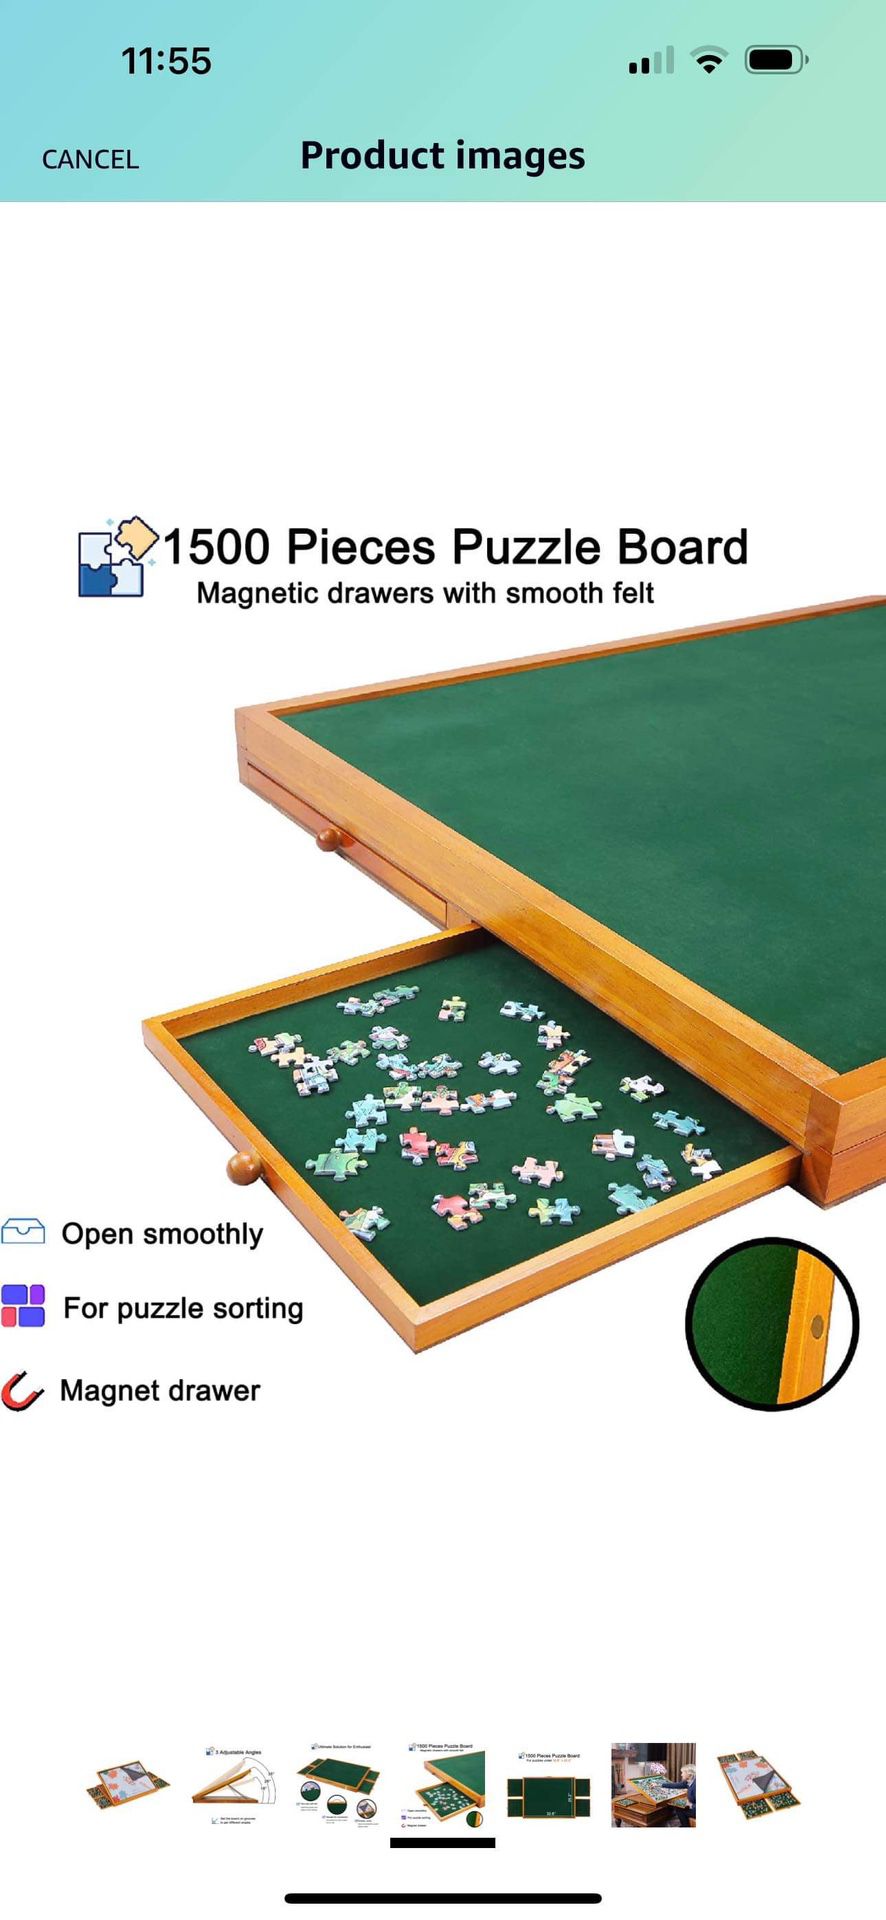 1500 Piece Non-Wood Jigsaw Puzzle Board with Drawers and Felt